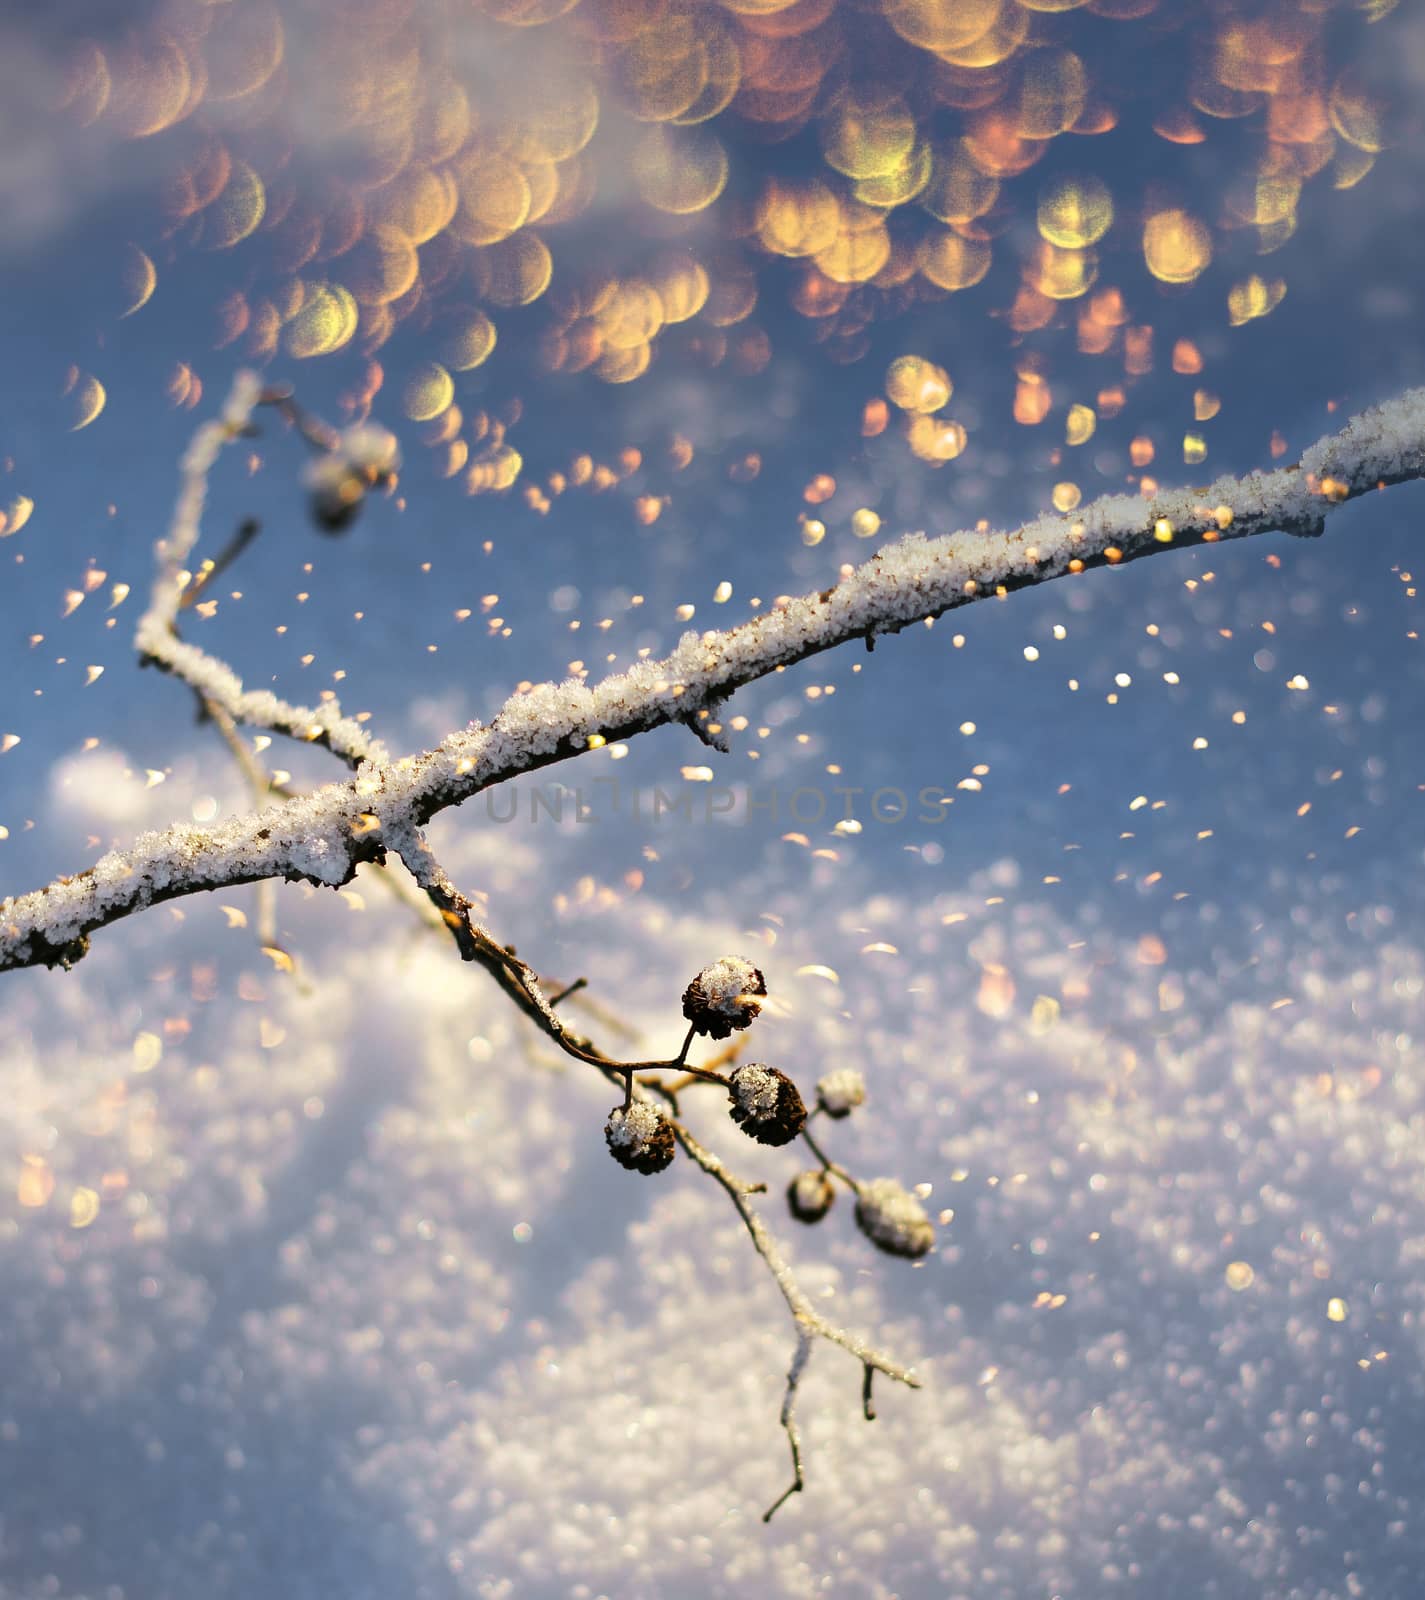 Frozen tree branch twig with colourful flakes snowfall season concept
